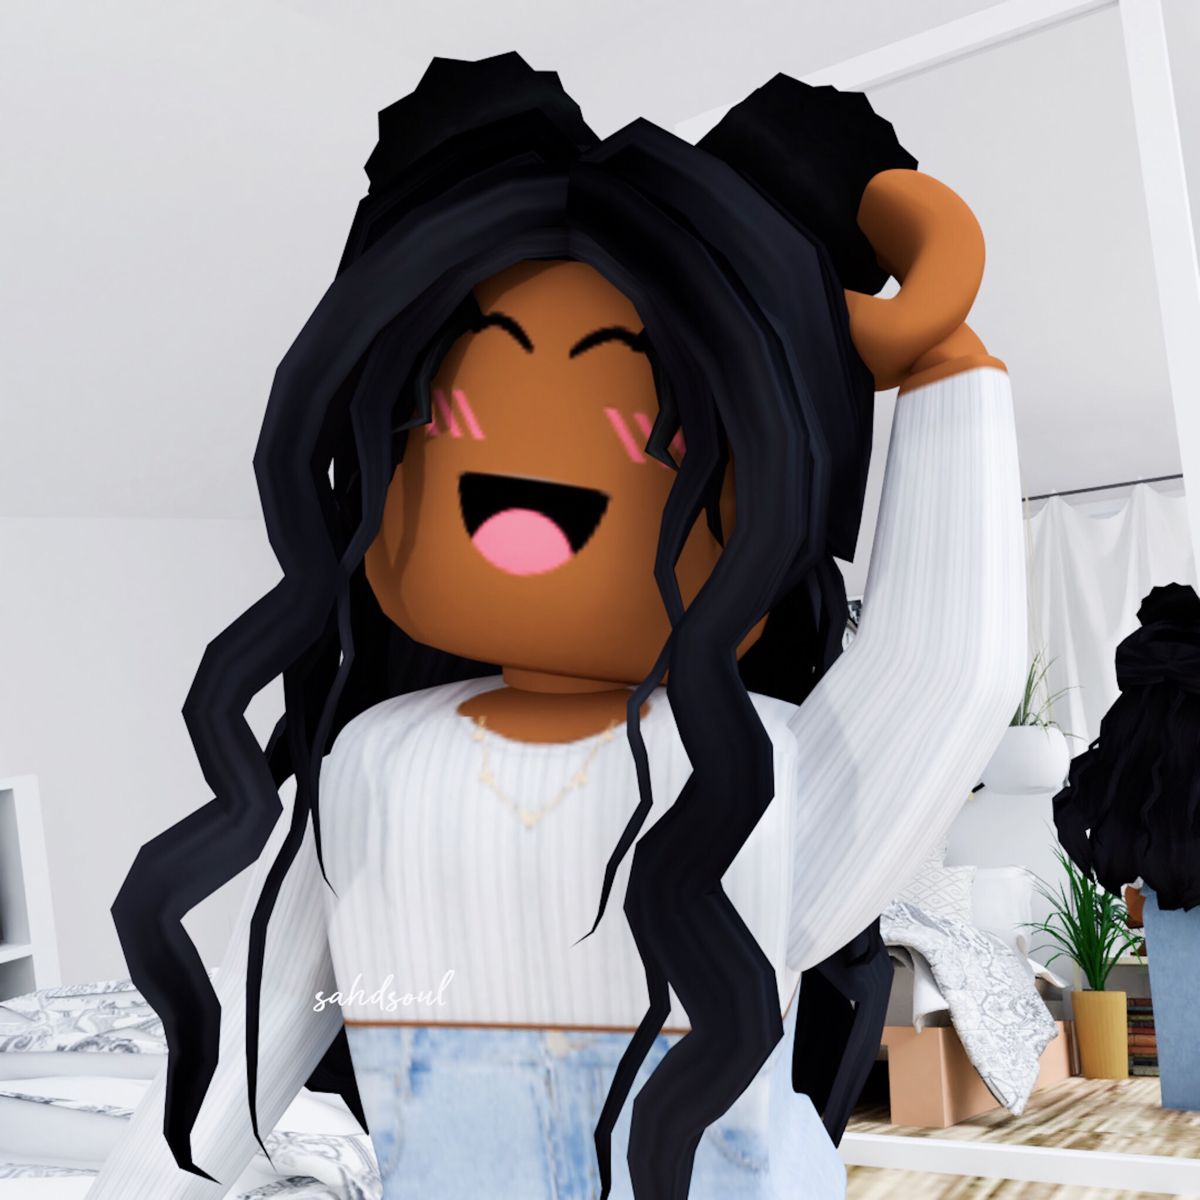 Aesthetic Roblox Girls Wallpapers posted by Zoey Peltier